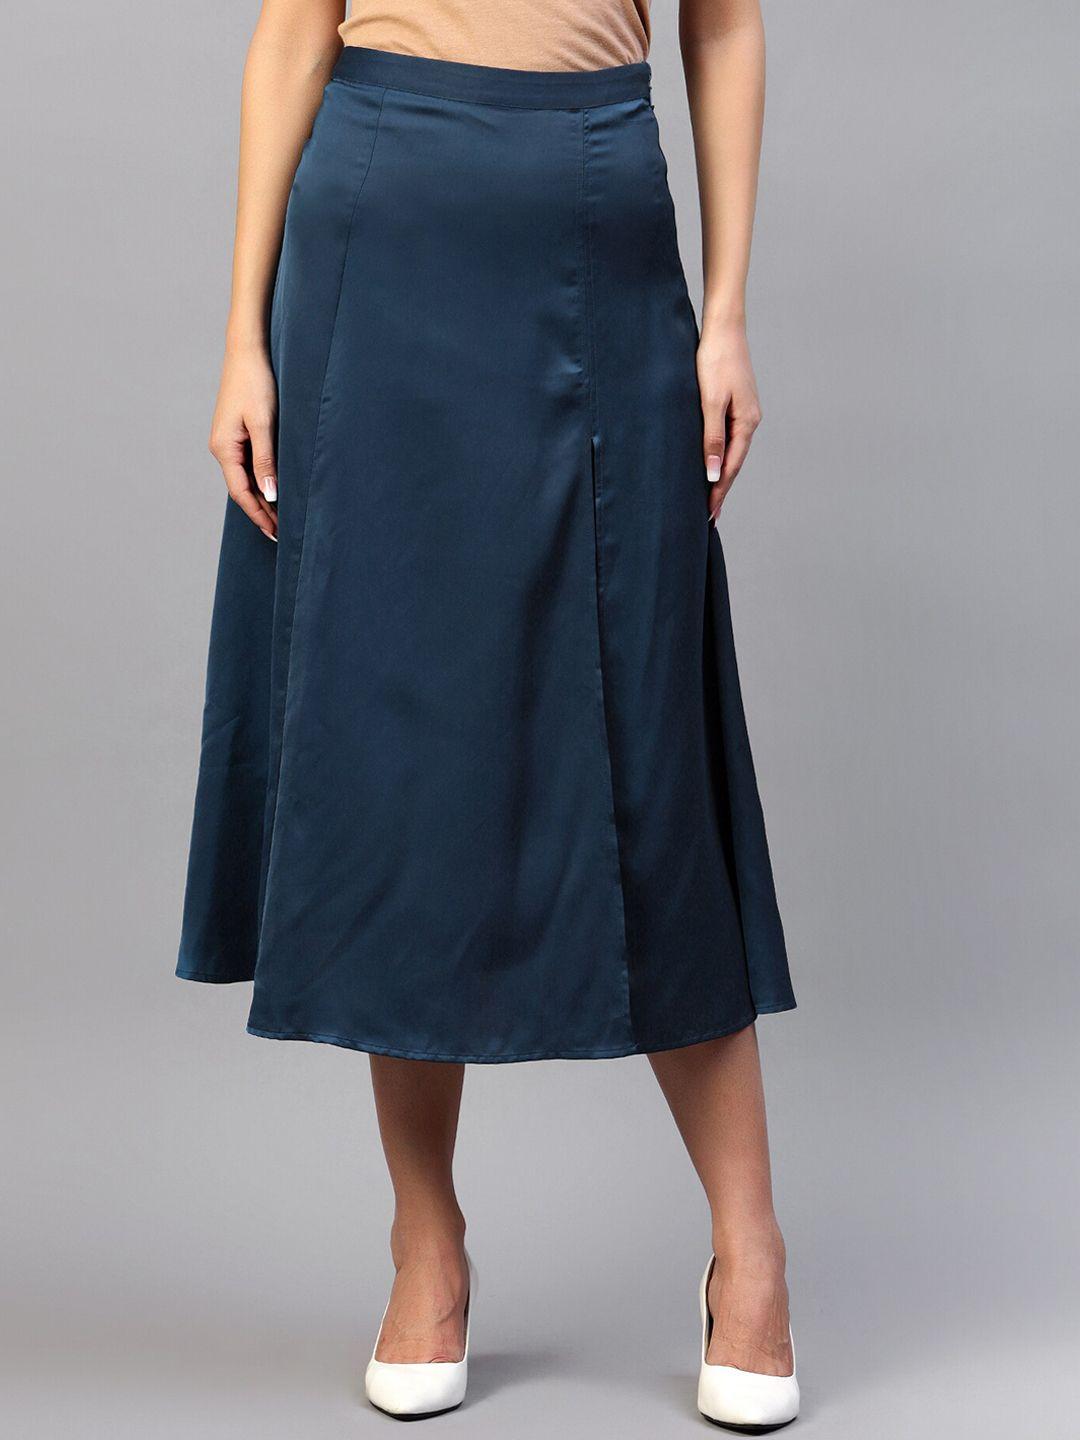 hencemade front slit midi a-line skirt